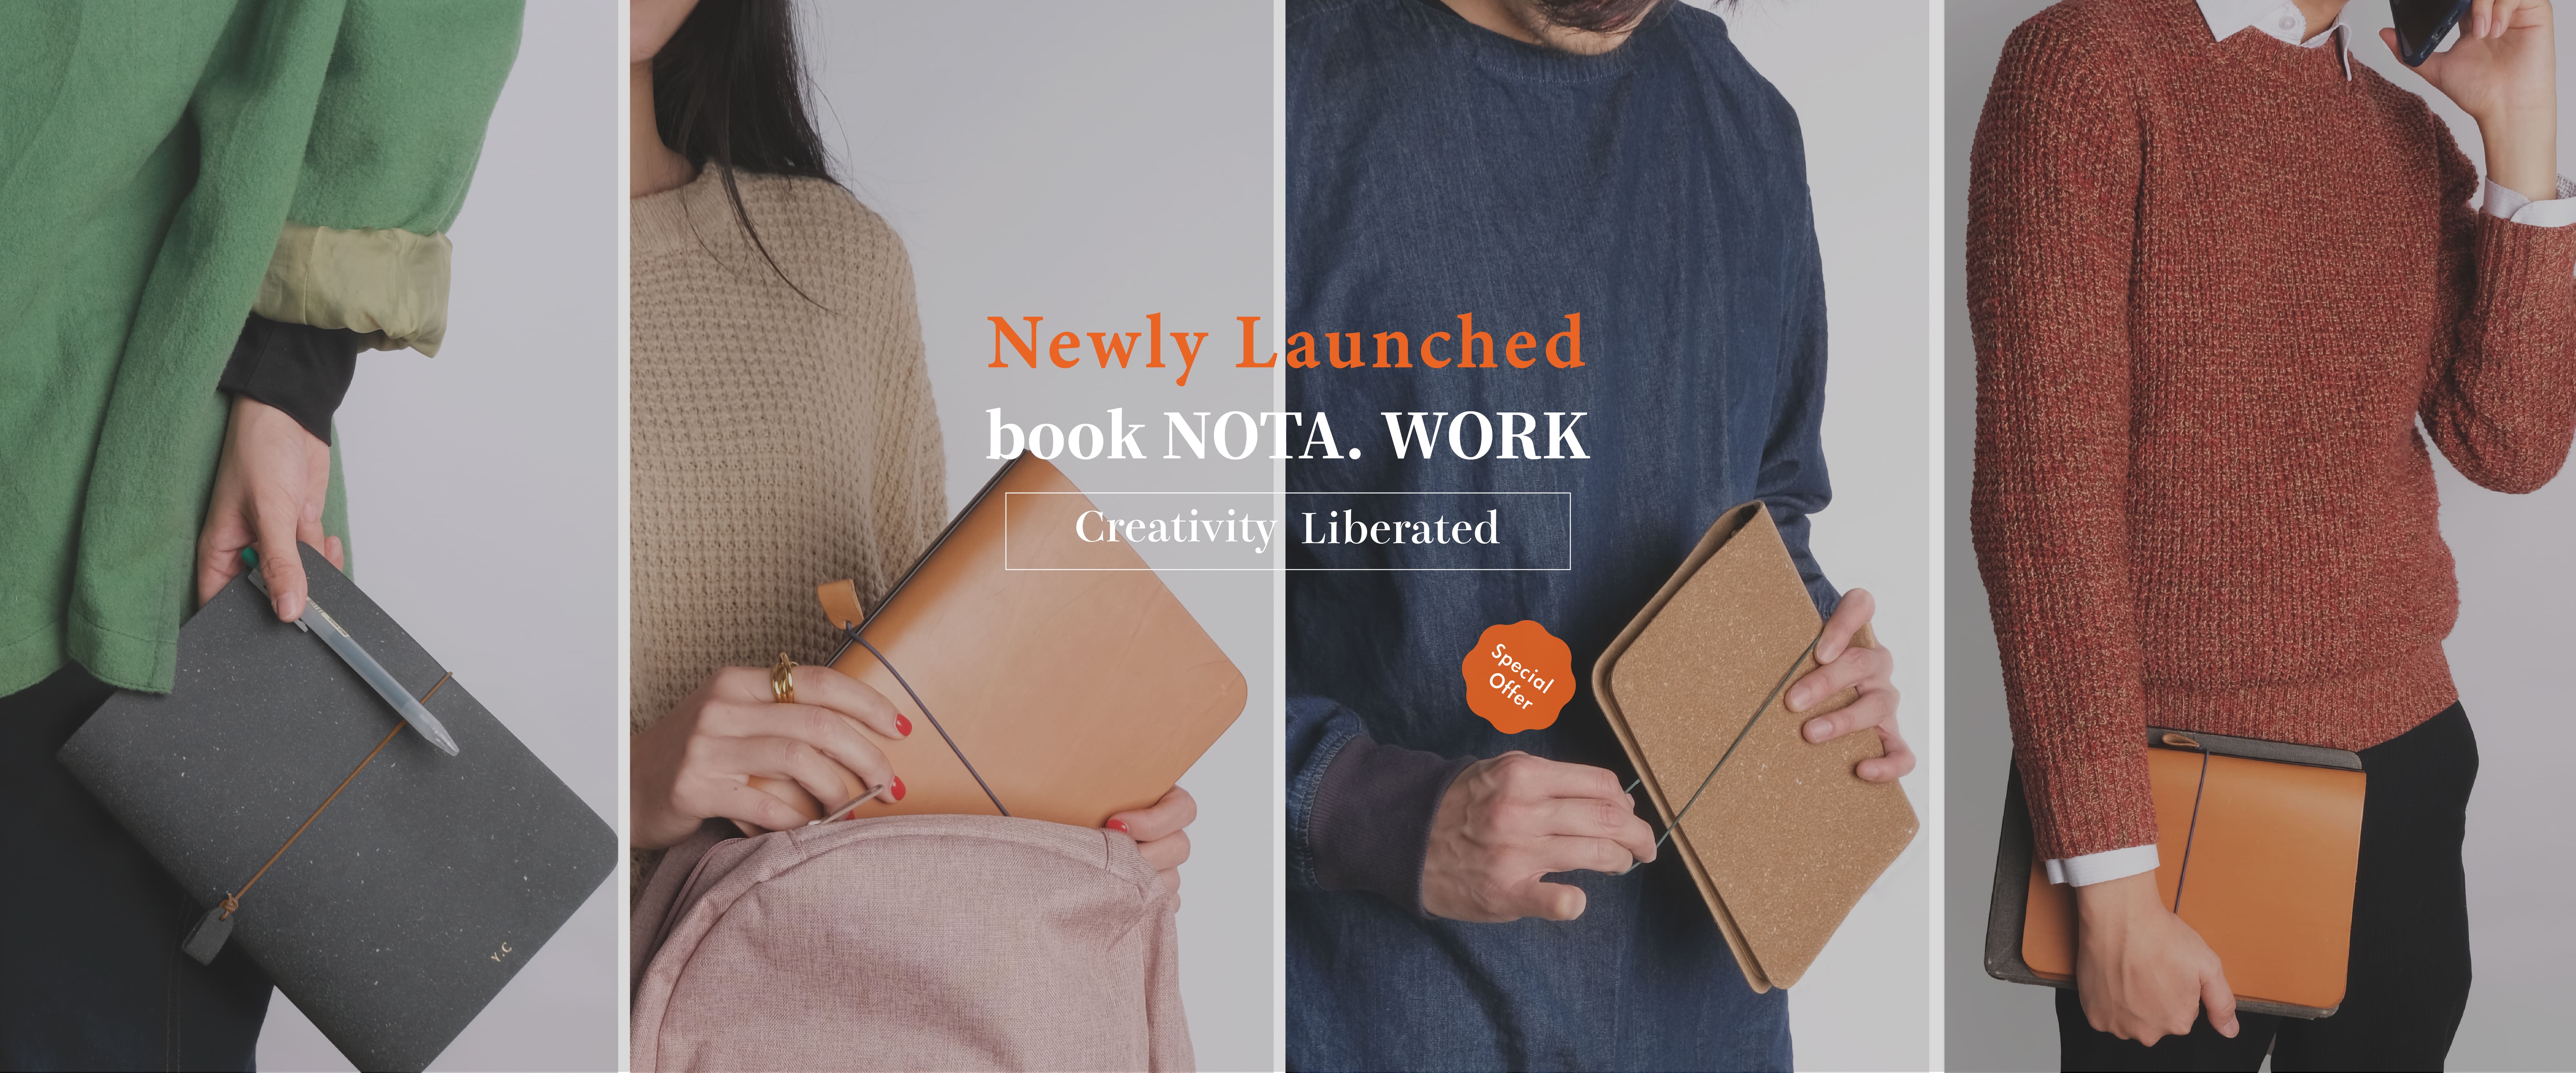 nota-worknewly-launched